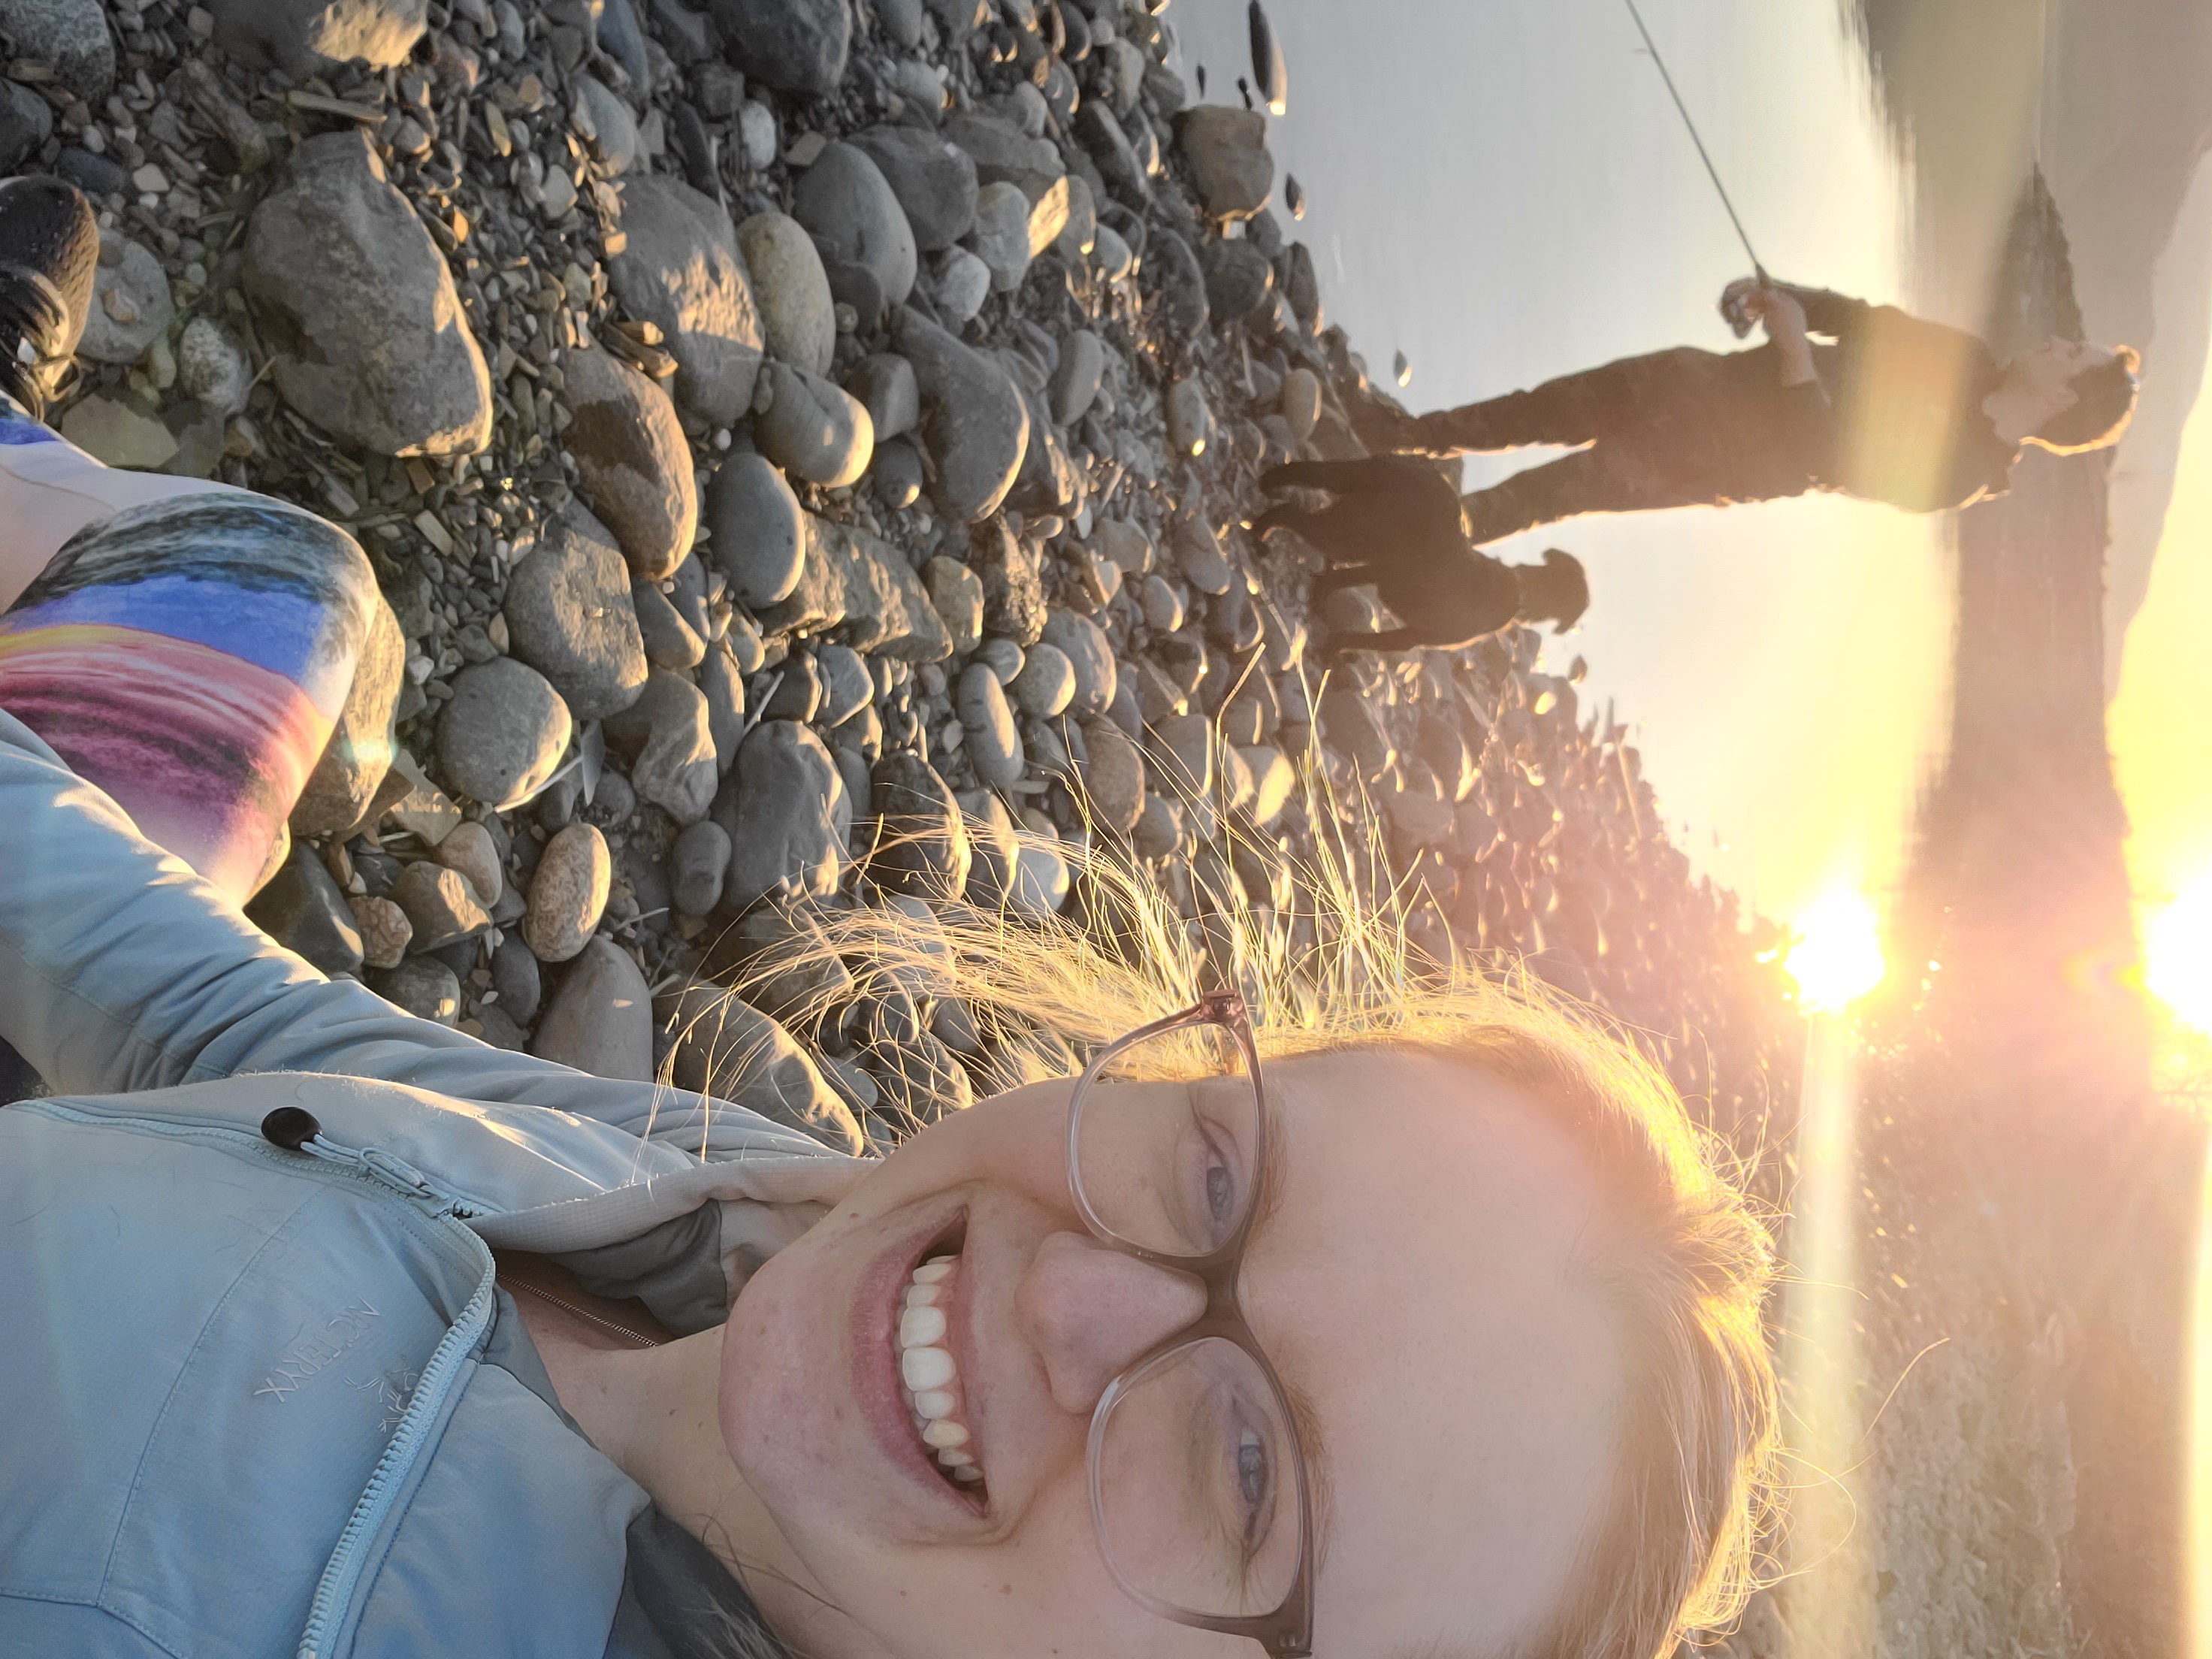 Woman wearing glasses at rocky beach and man with dog at water’s edge with sunset.